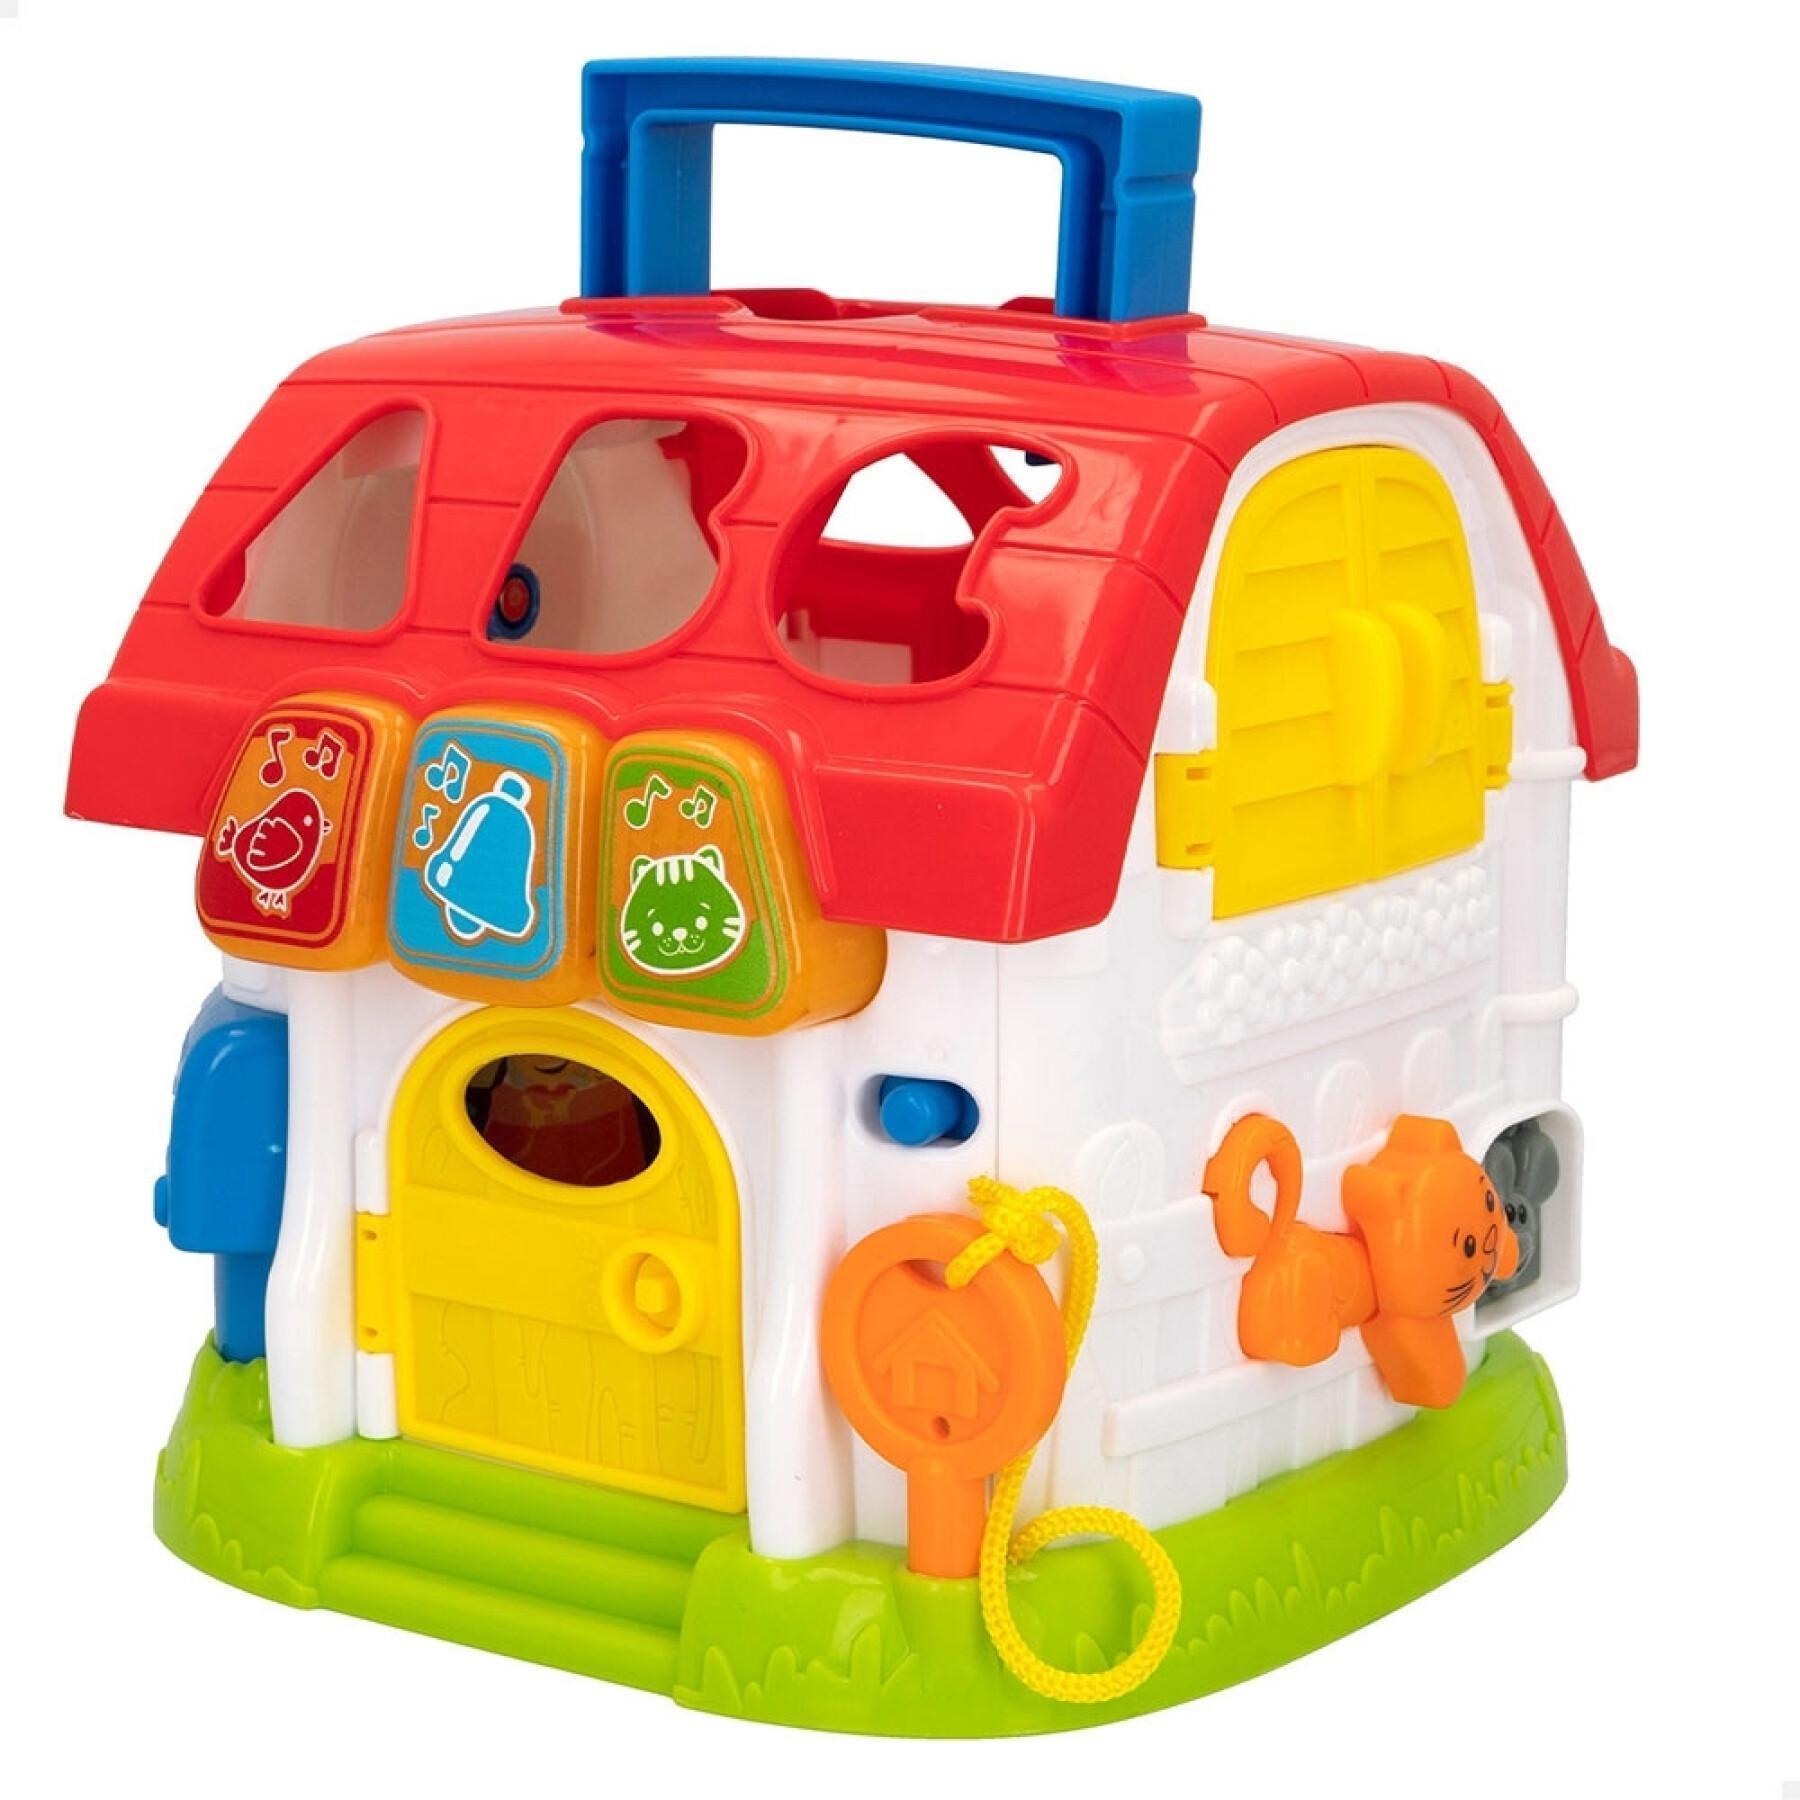 House activity light, sounds and melodies Winfun